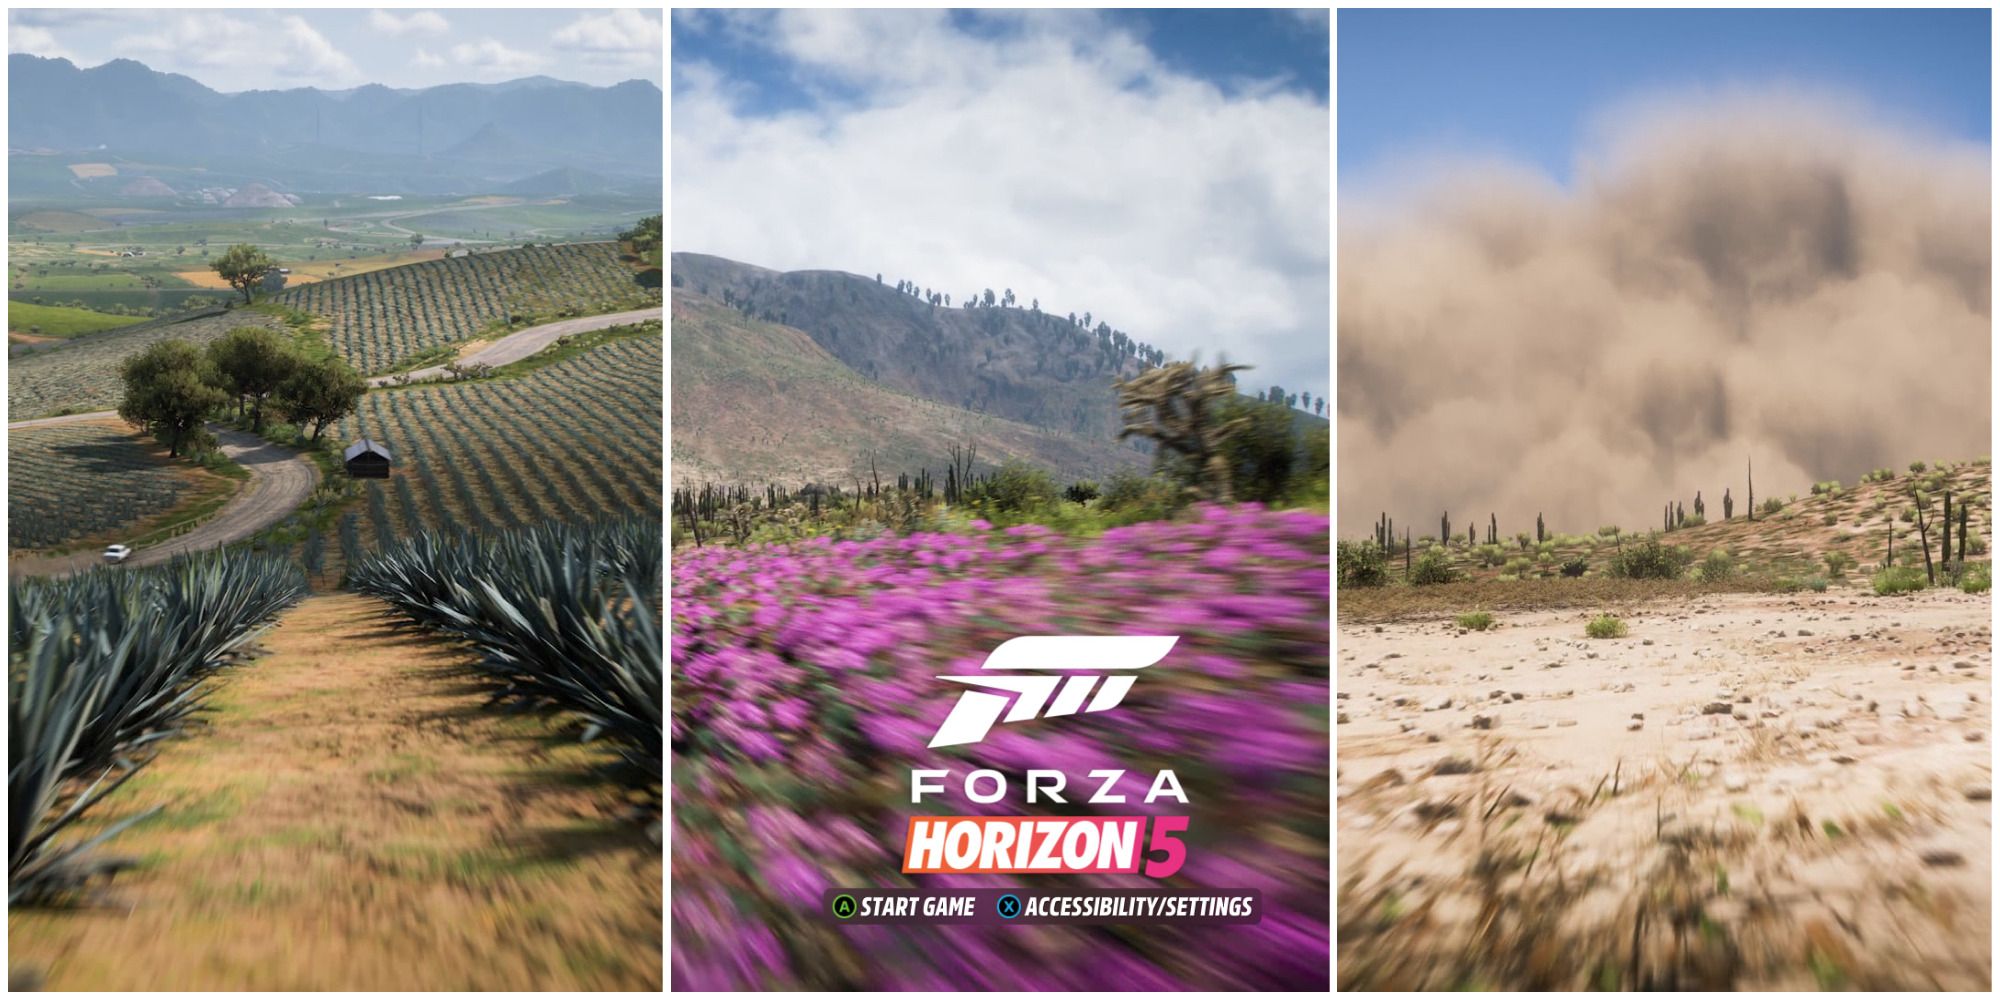 forza horizon 5 field, purple flowers and logo, storm featured